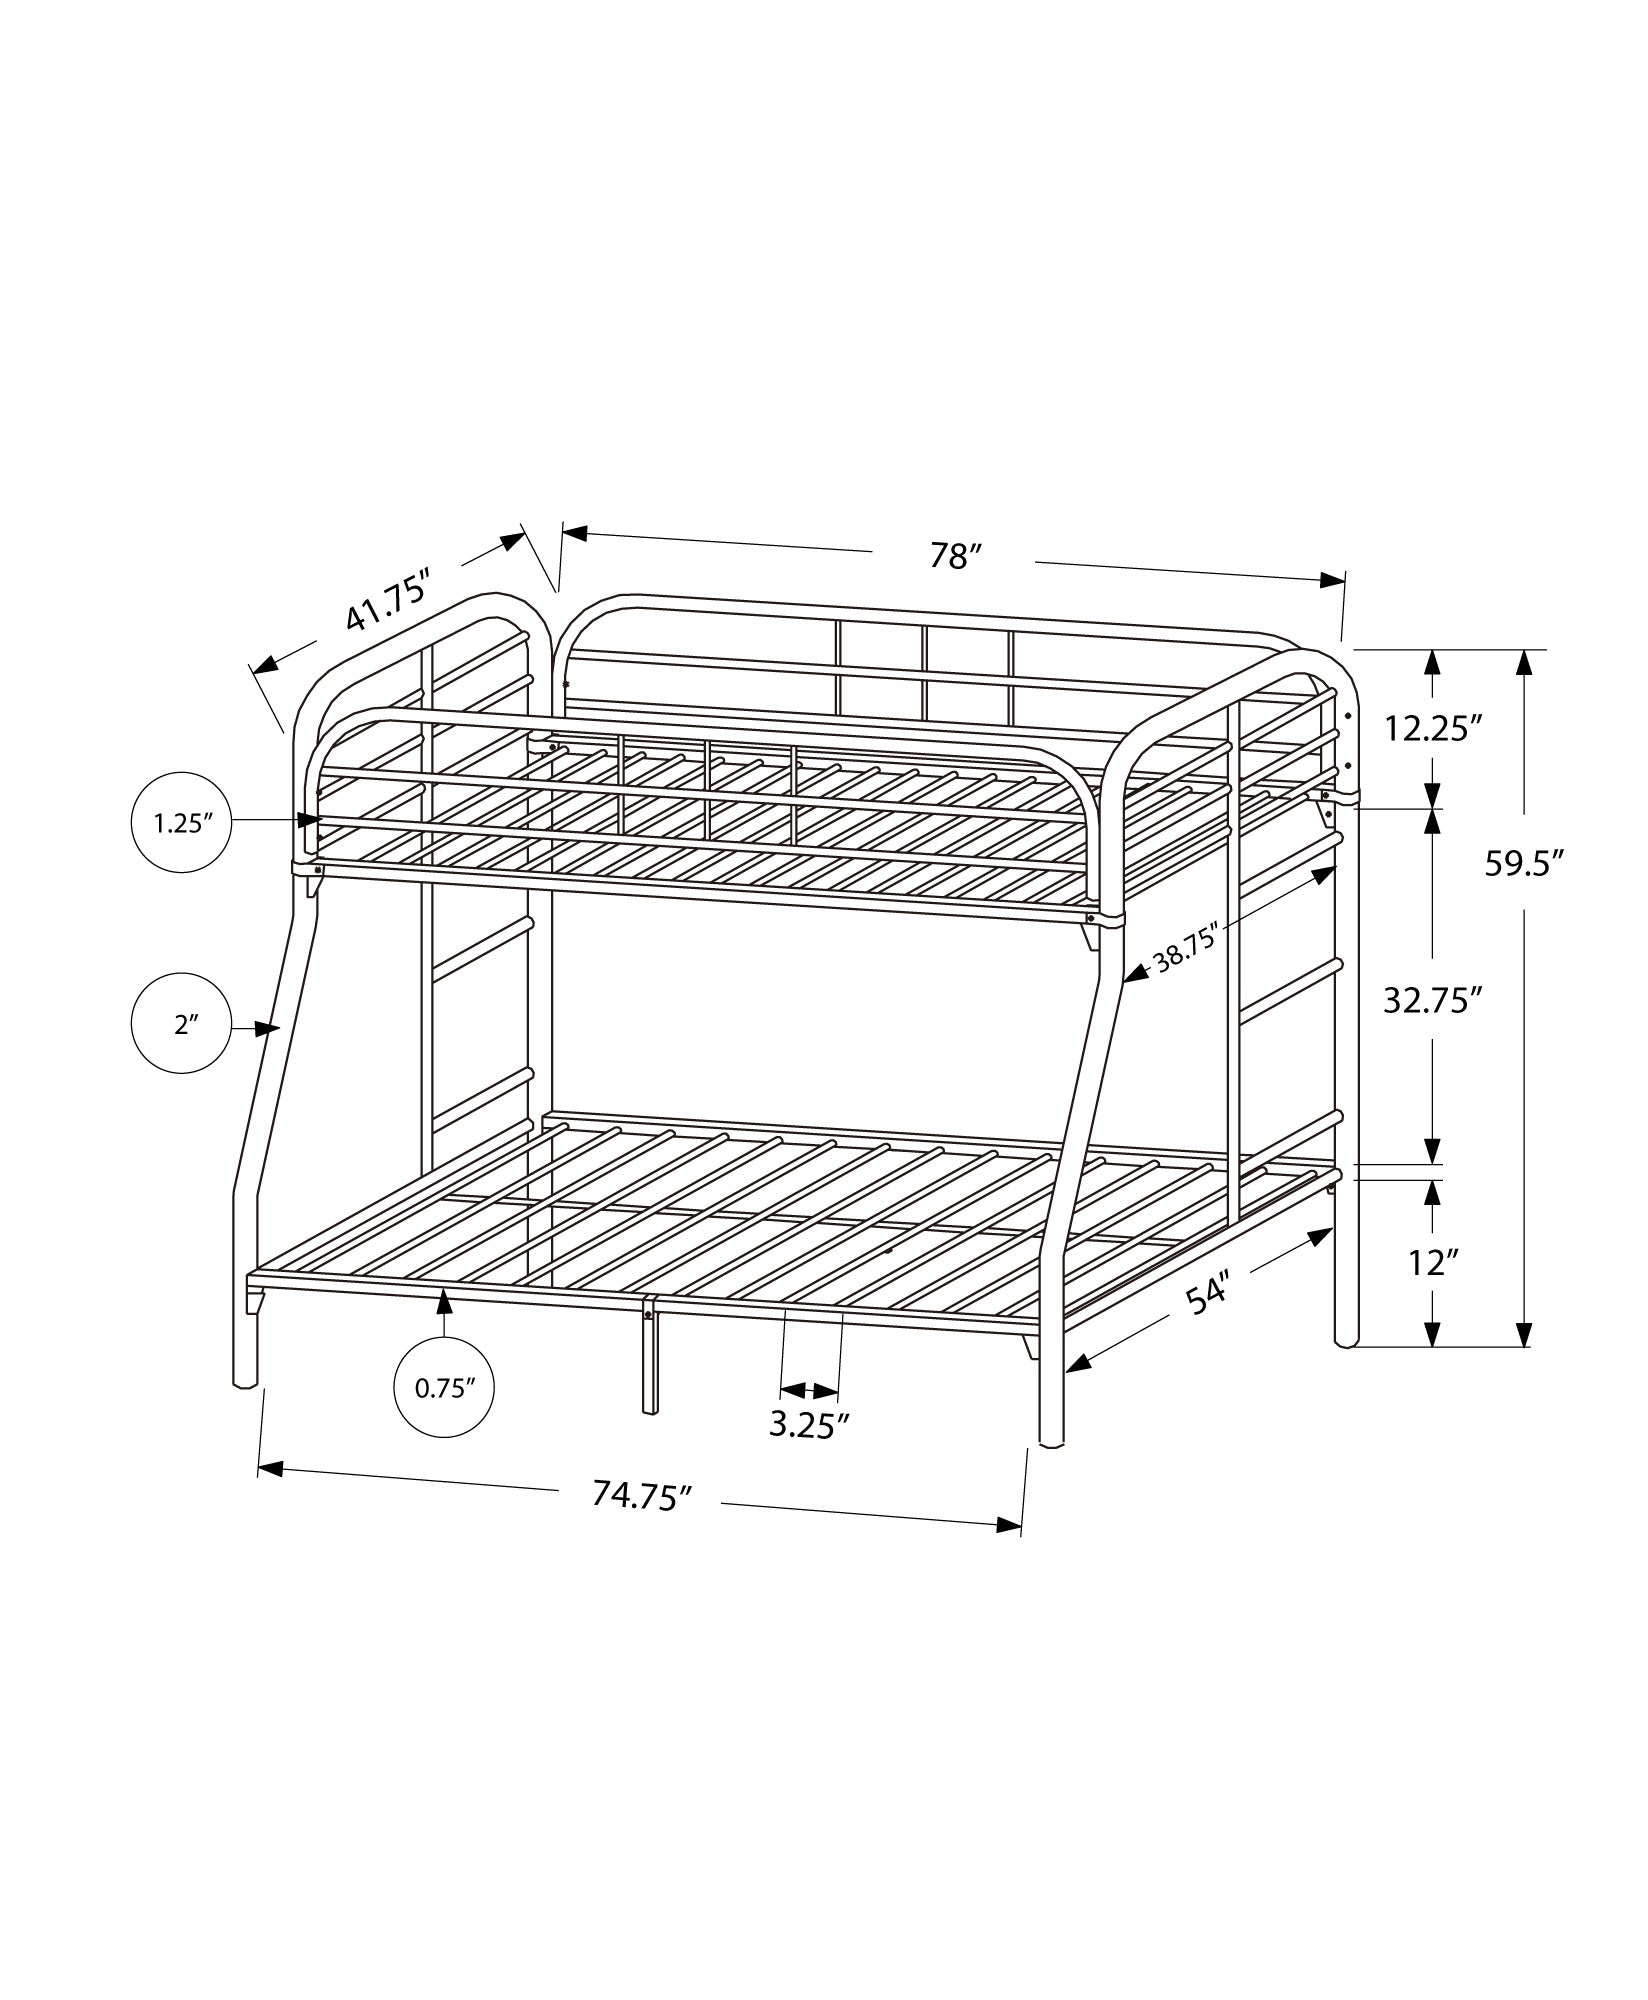 Bunk Bed - Twin / Full Size / Silver Metal